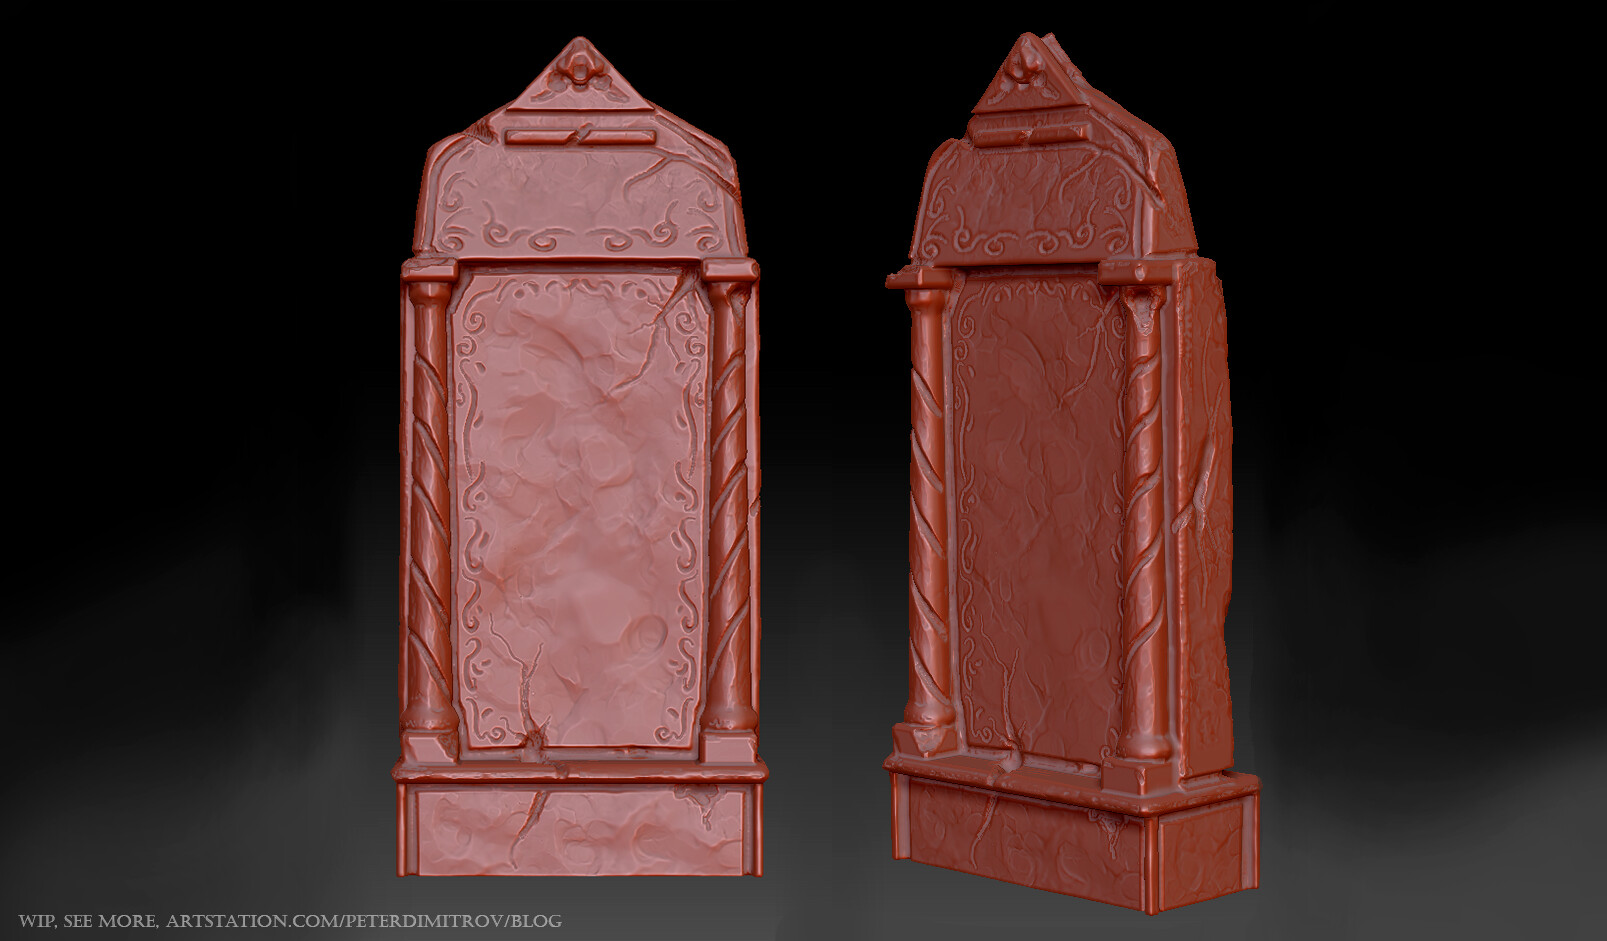 Zbrush screenshot of some of the headstone sculpts. Showcased in the typical, red in color, Zbrush shader.